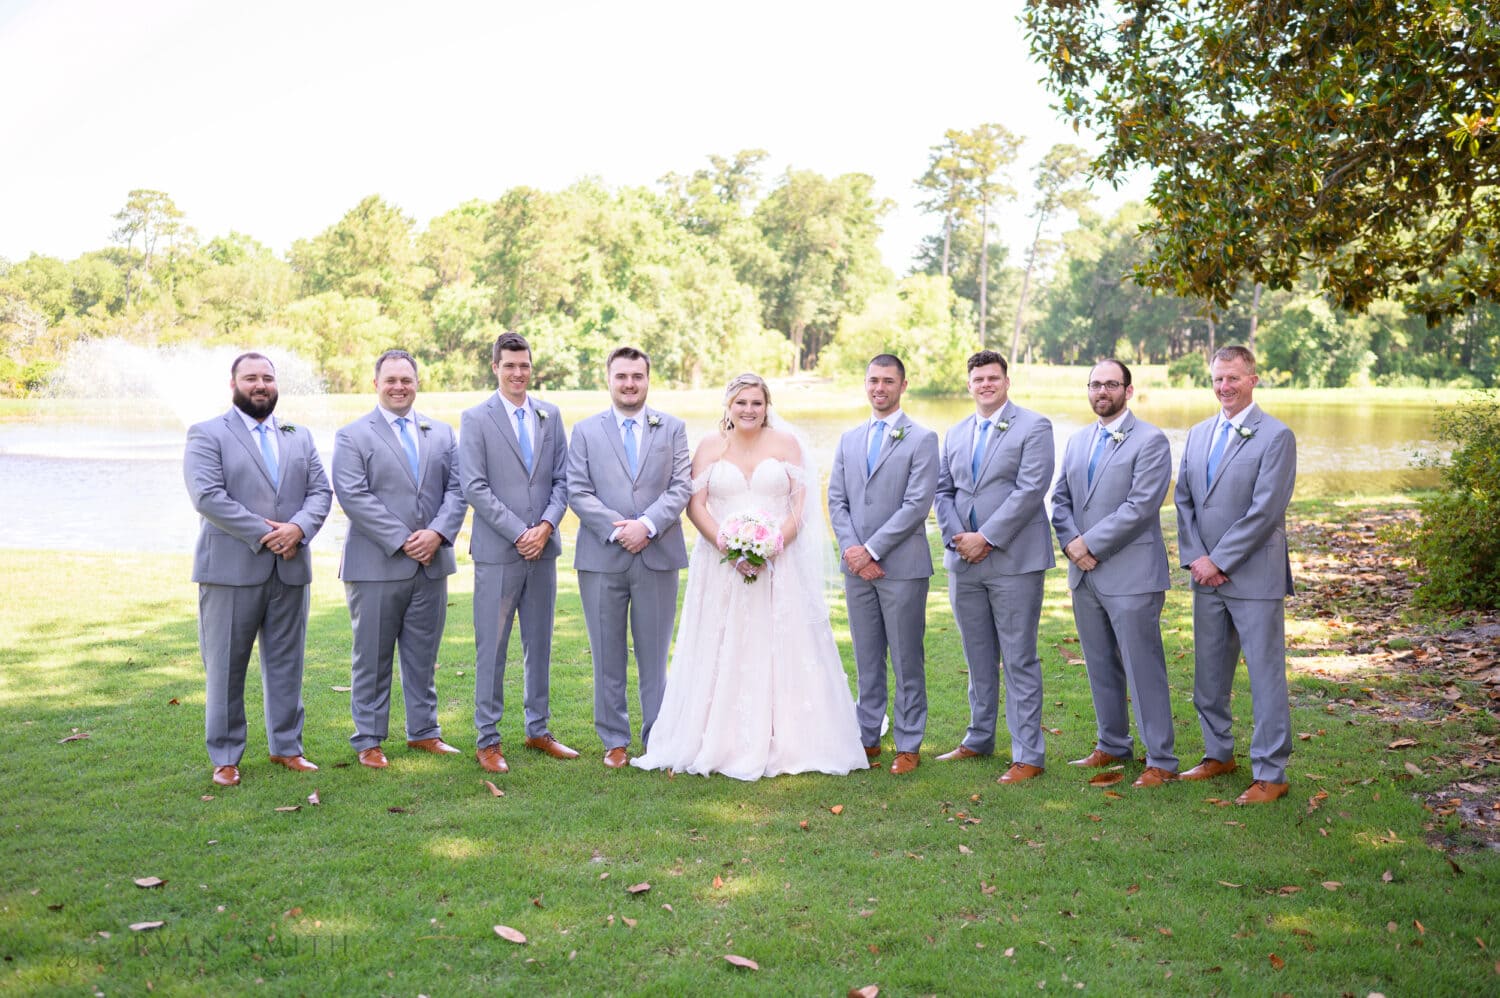 Pictures with the bridal party - Pawleys Plantation